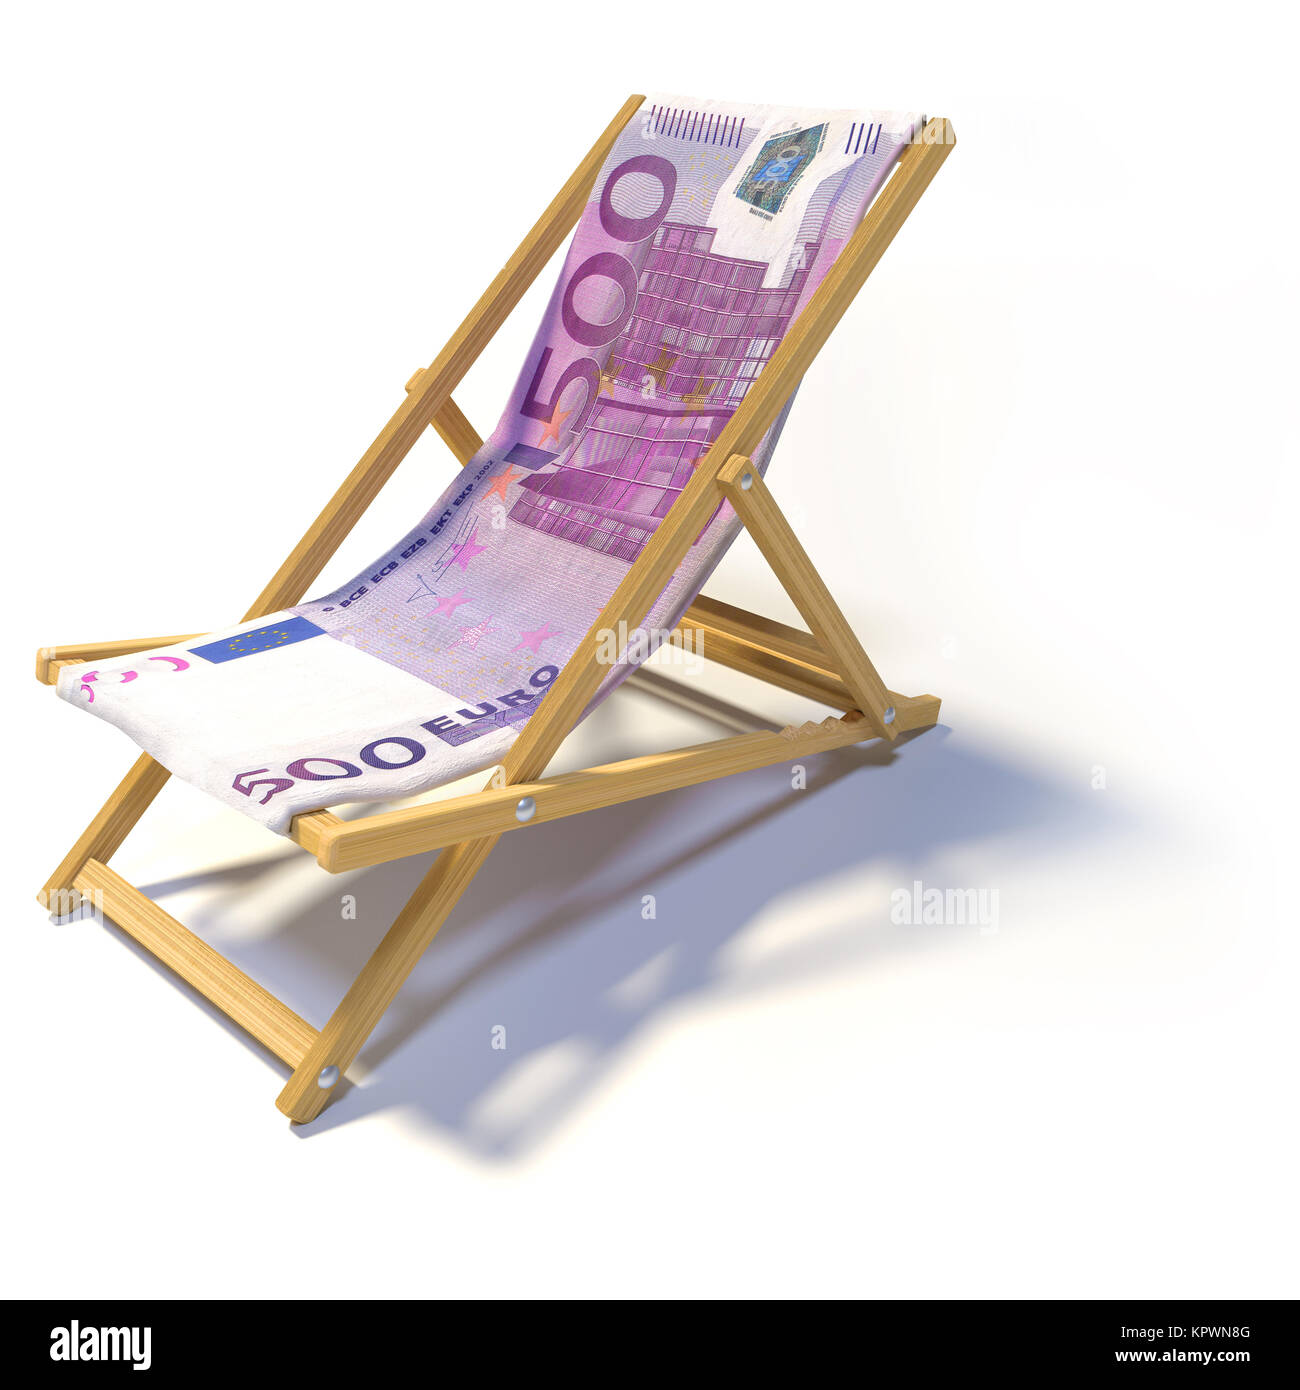 folding link chair with 500 euros Stock Photo